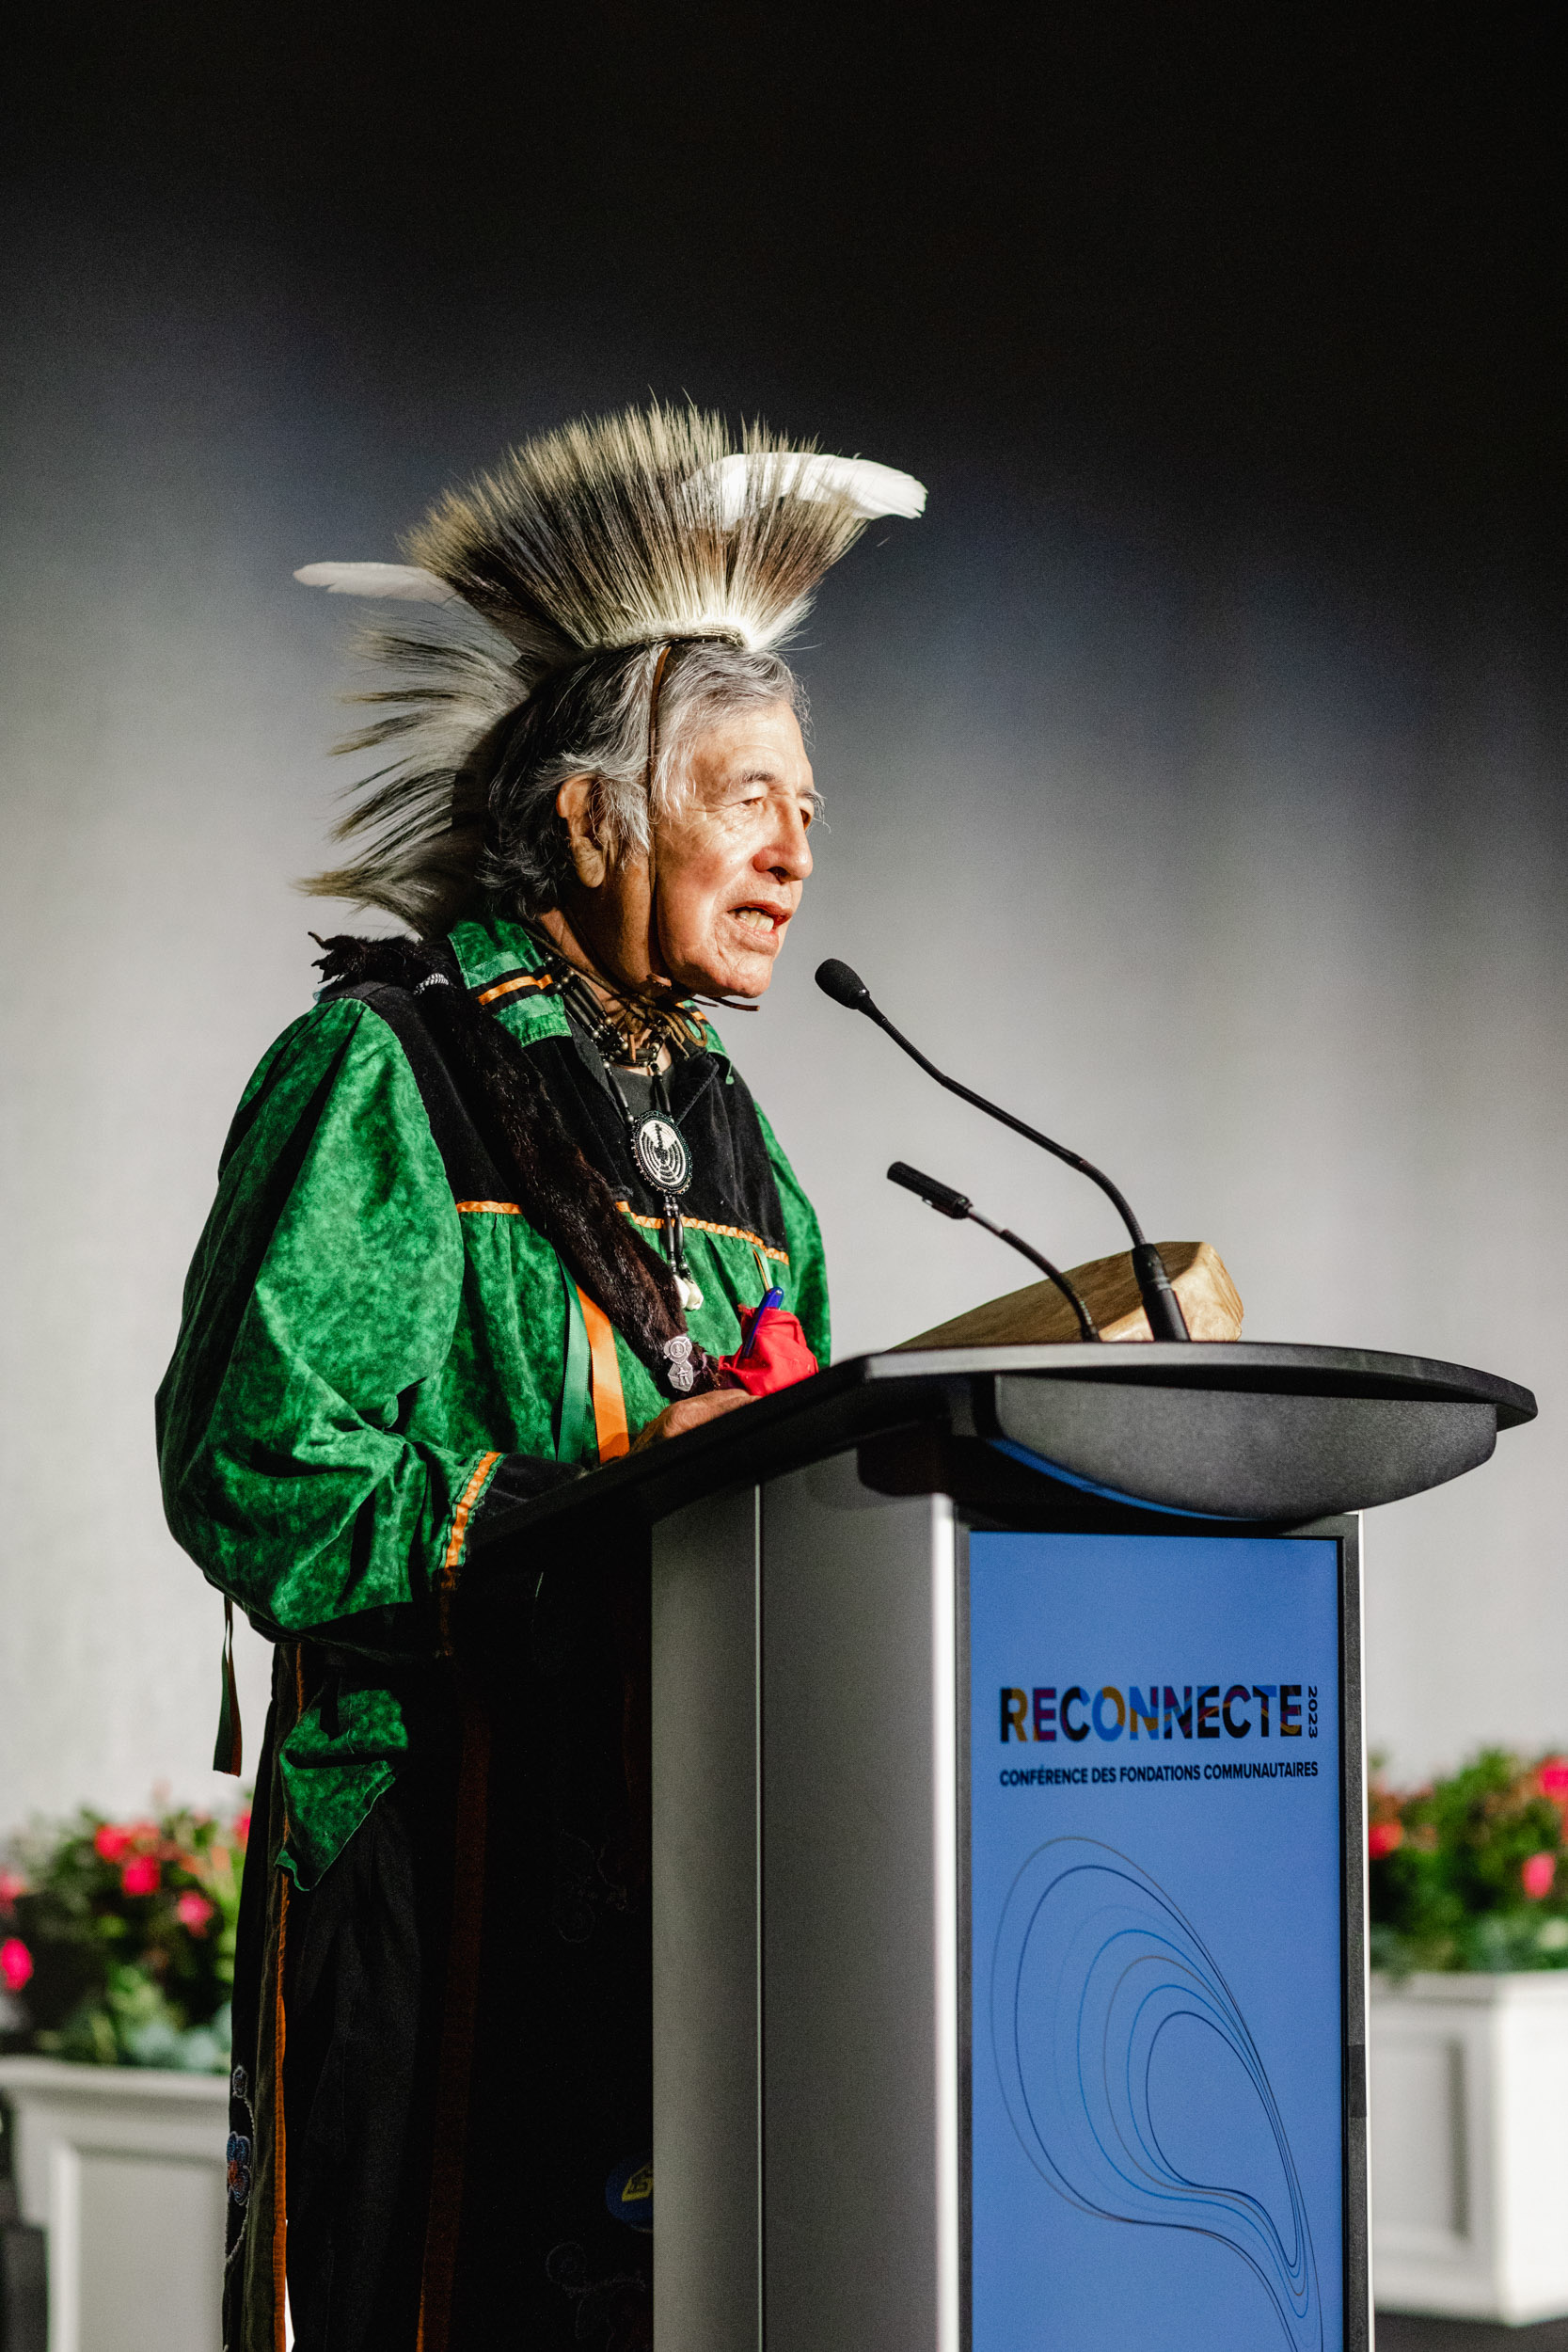 A native american man speaking at a podium at a conference.